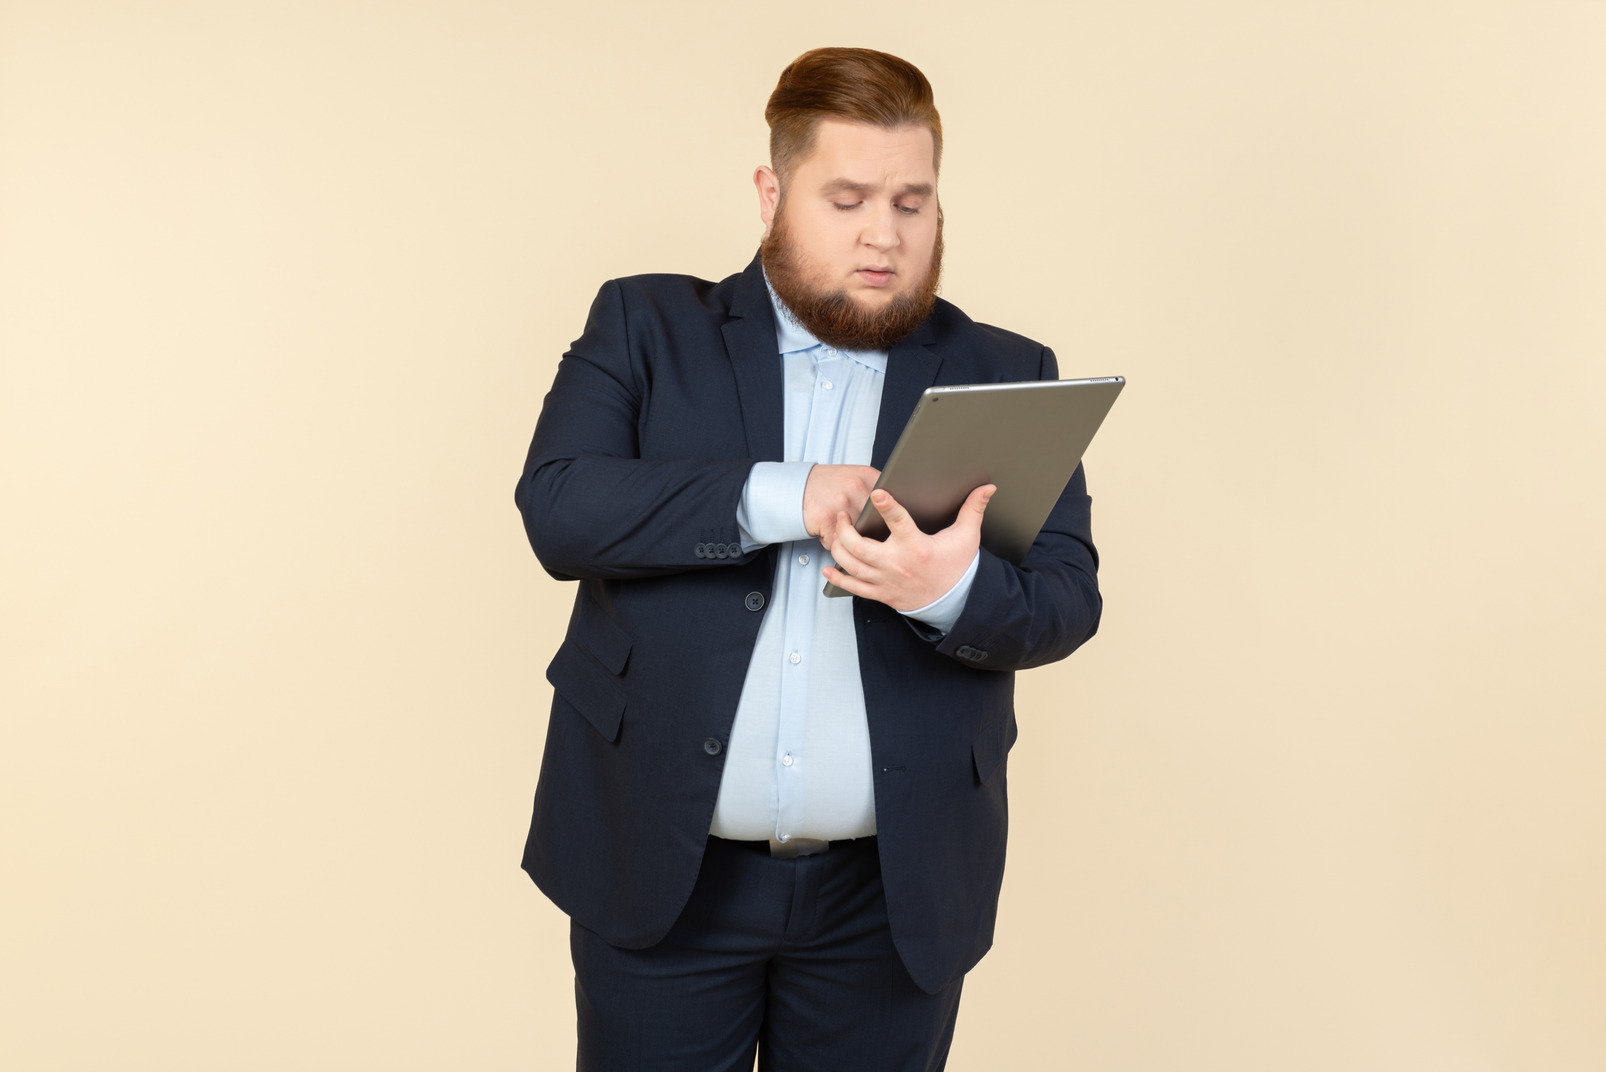 Pensive young overweight office worker holding digital tablet